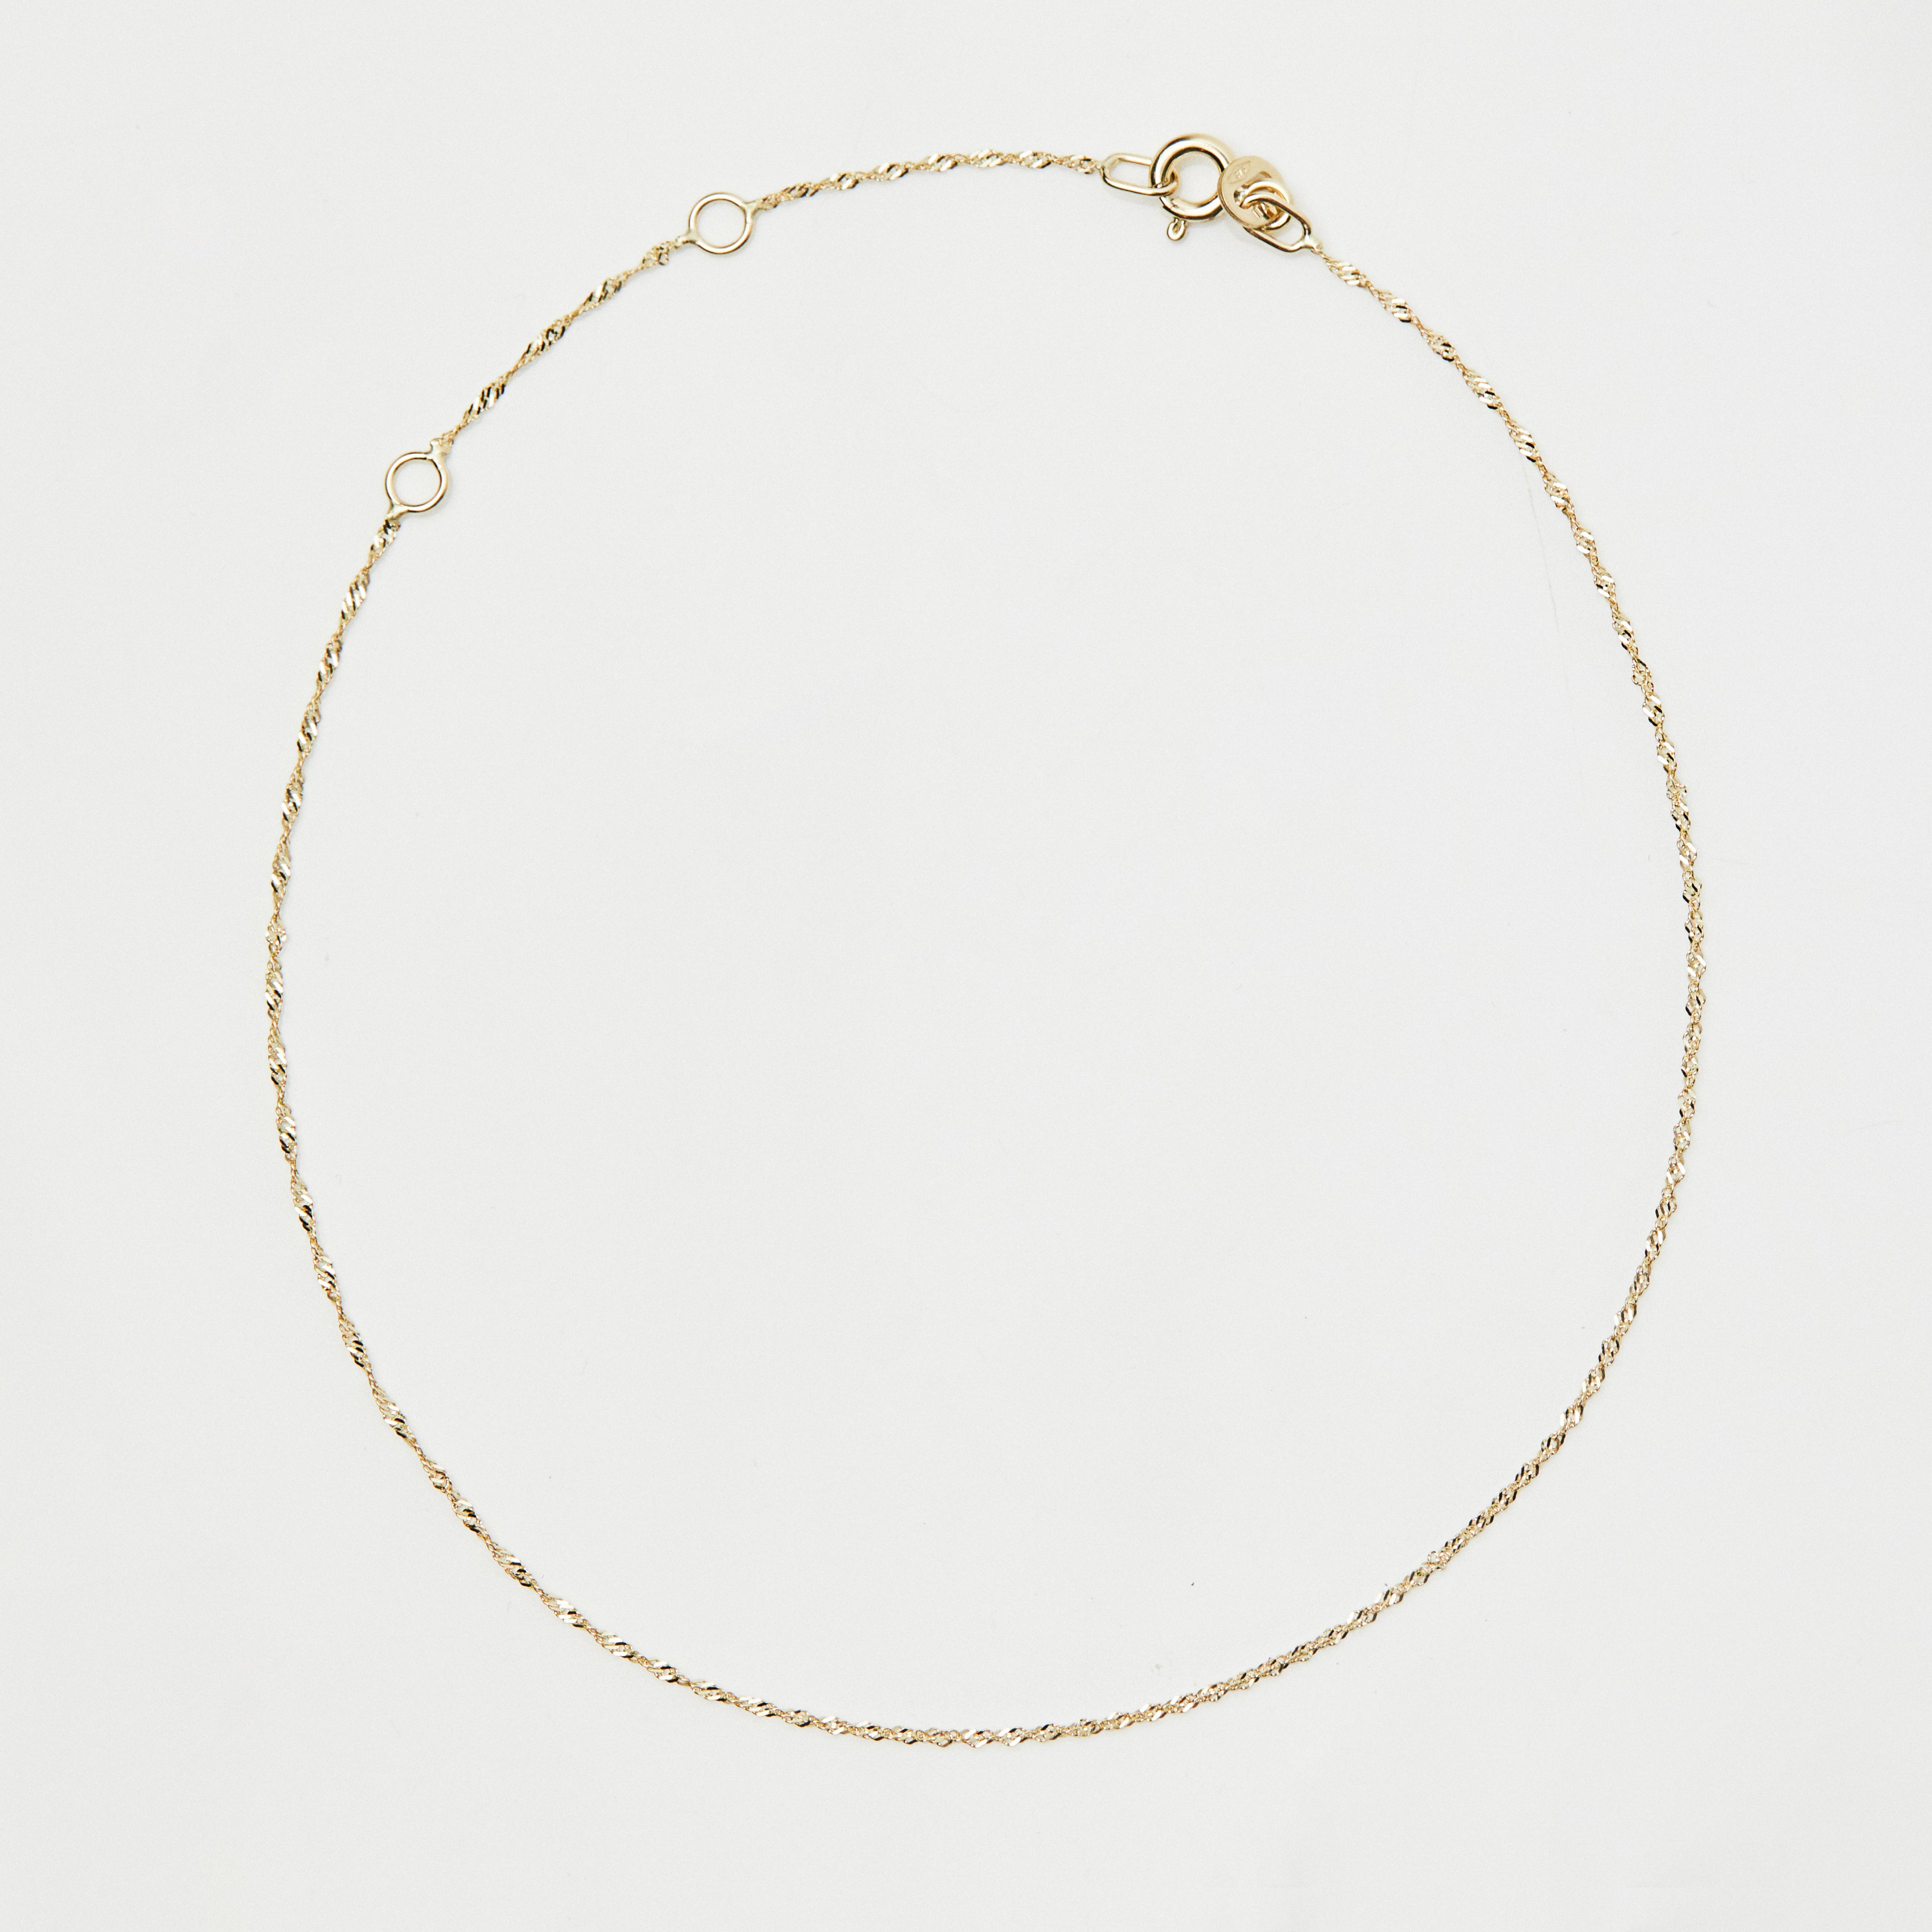 9k Solid Gold Singapore Chain Anklet – Carrie Elizabeth